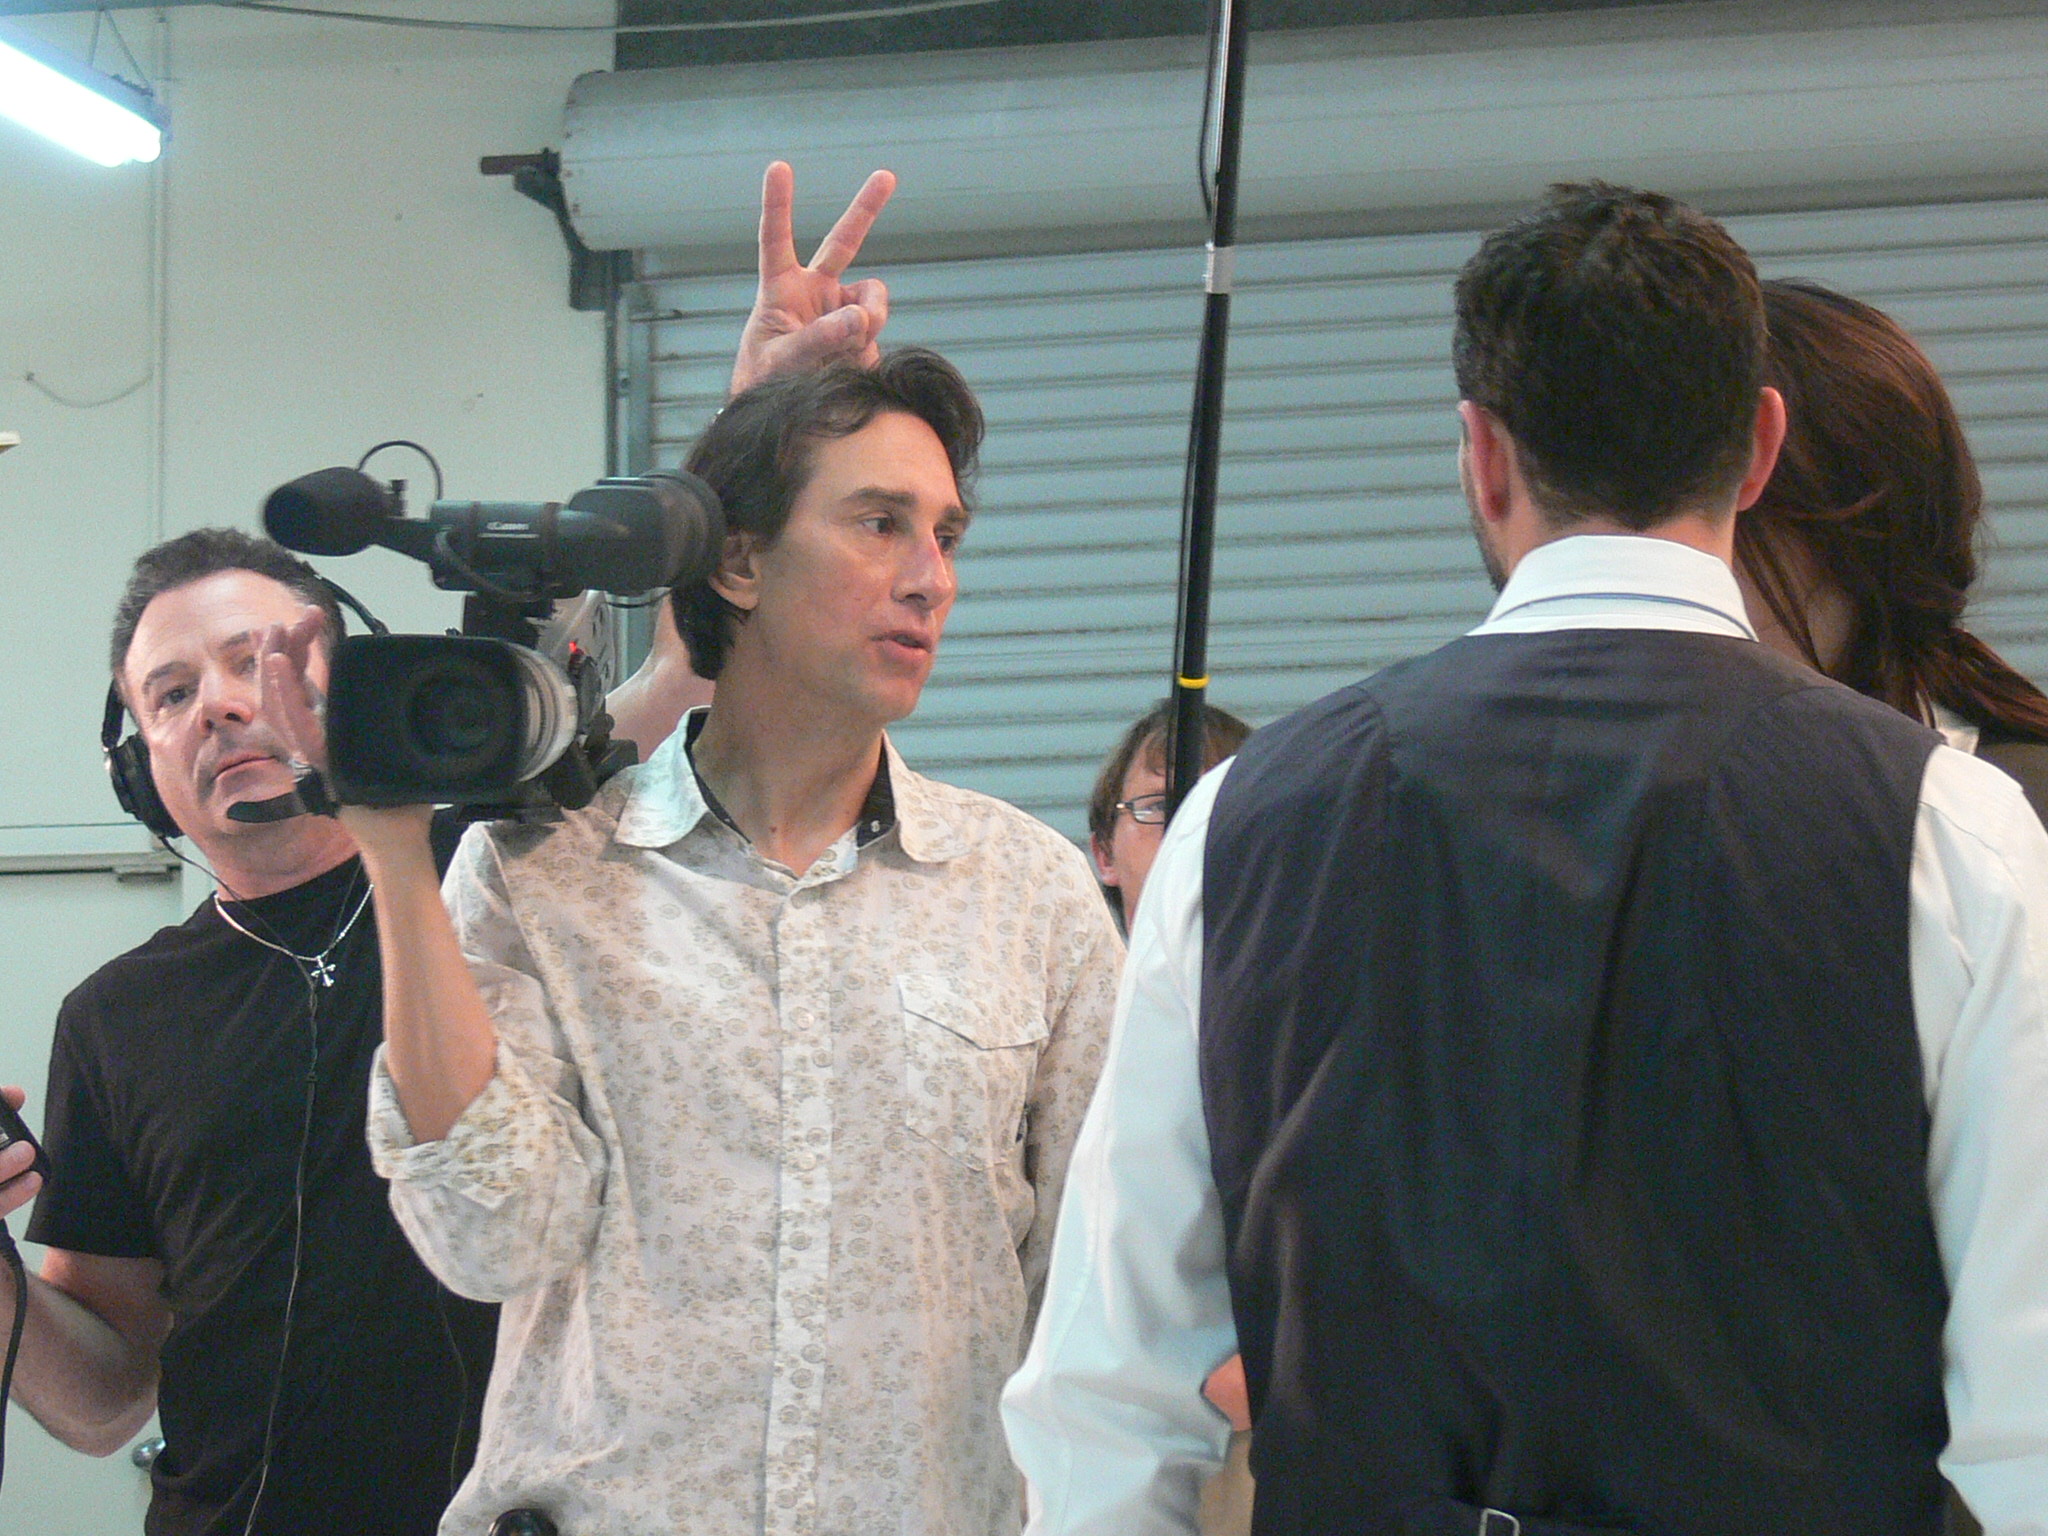 On set of indie commercial shoot 2011